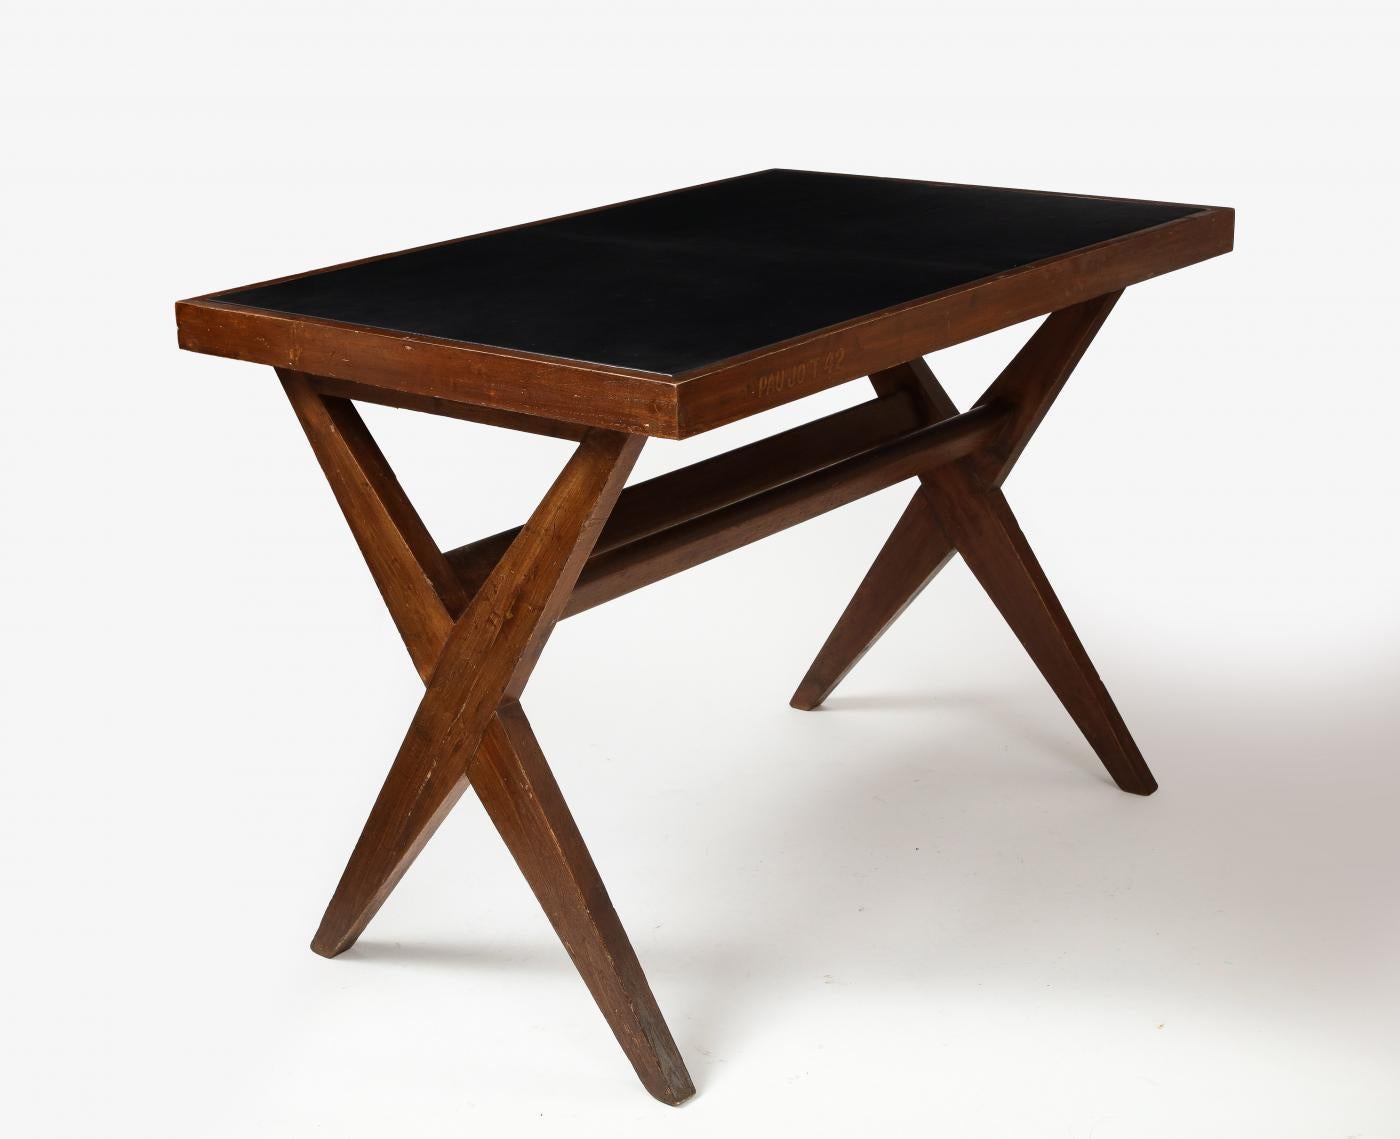 Indian Leather and Teak Desk by Pierre Jeanneret, 1959 For Sale